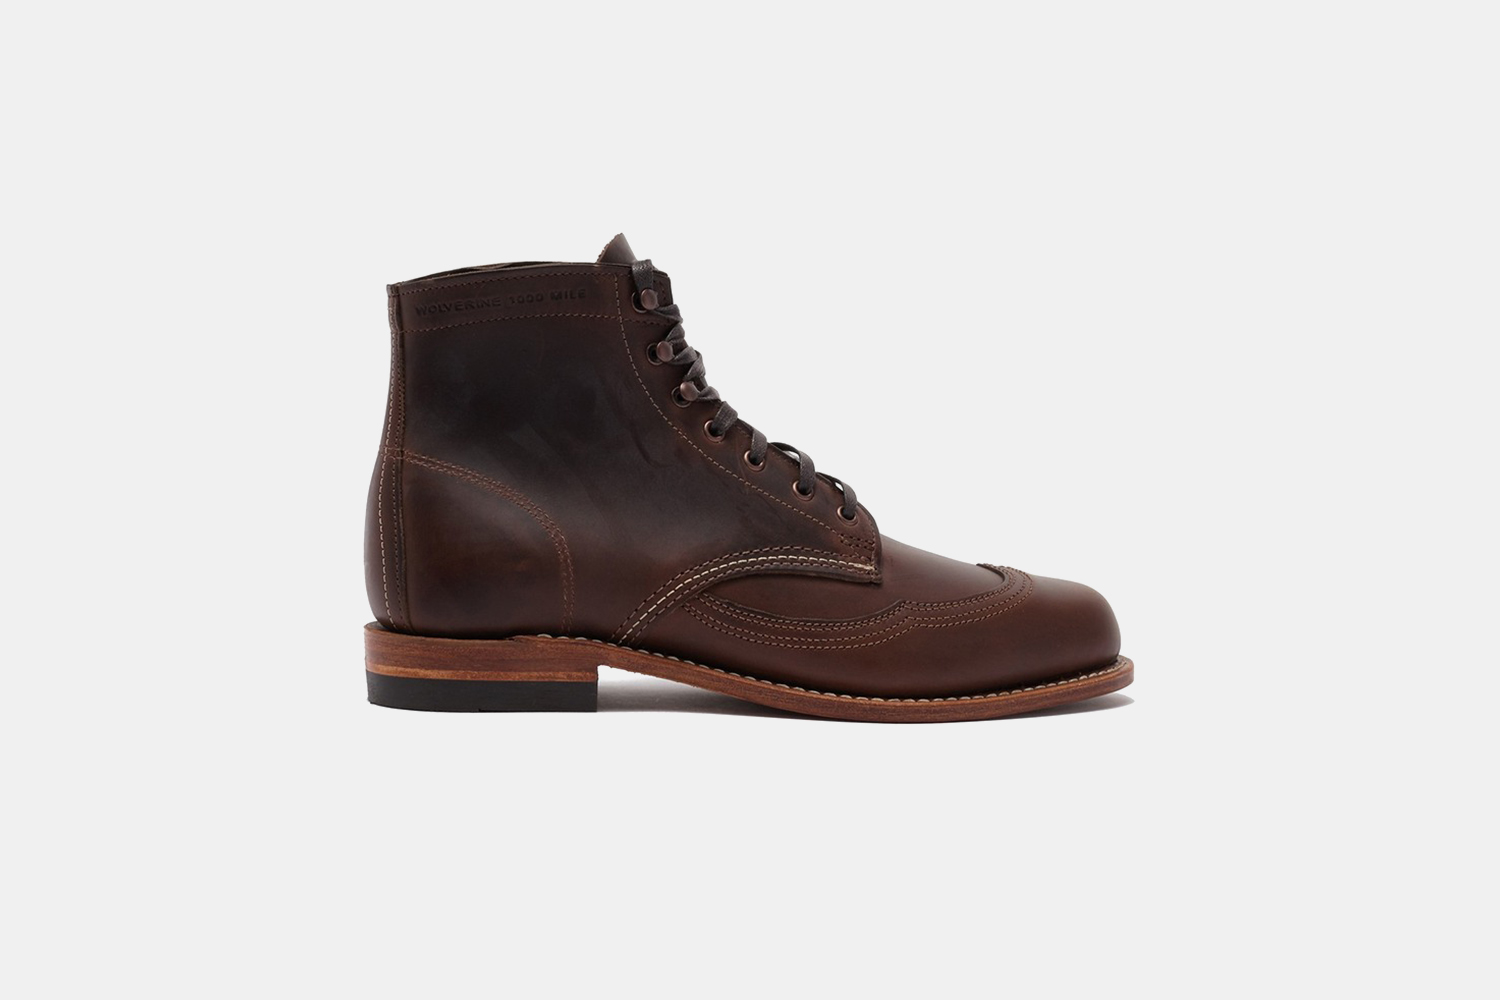 Deal: Wolverine Boots Are Seriously Cheap at Nordstrom Rack